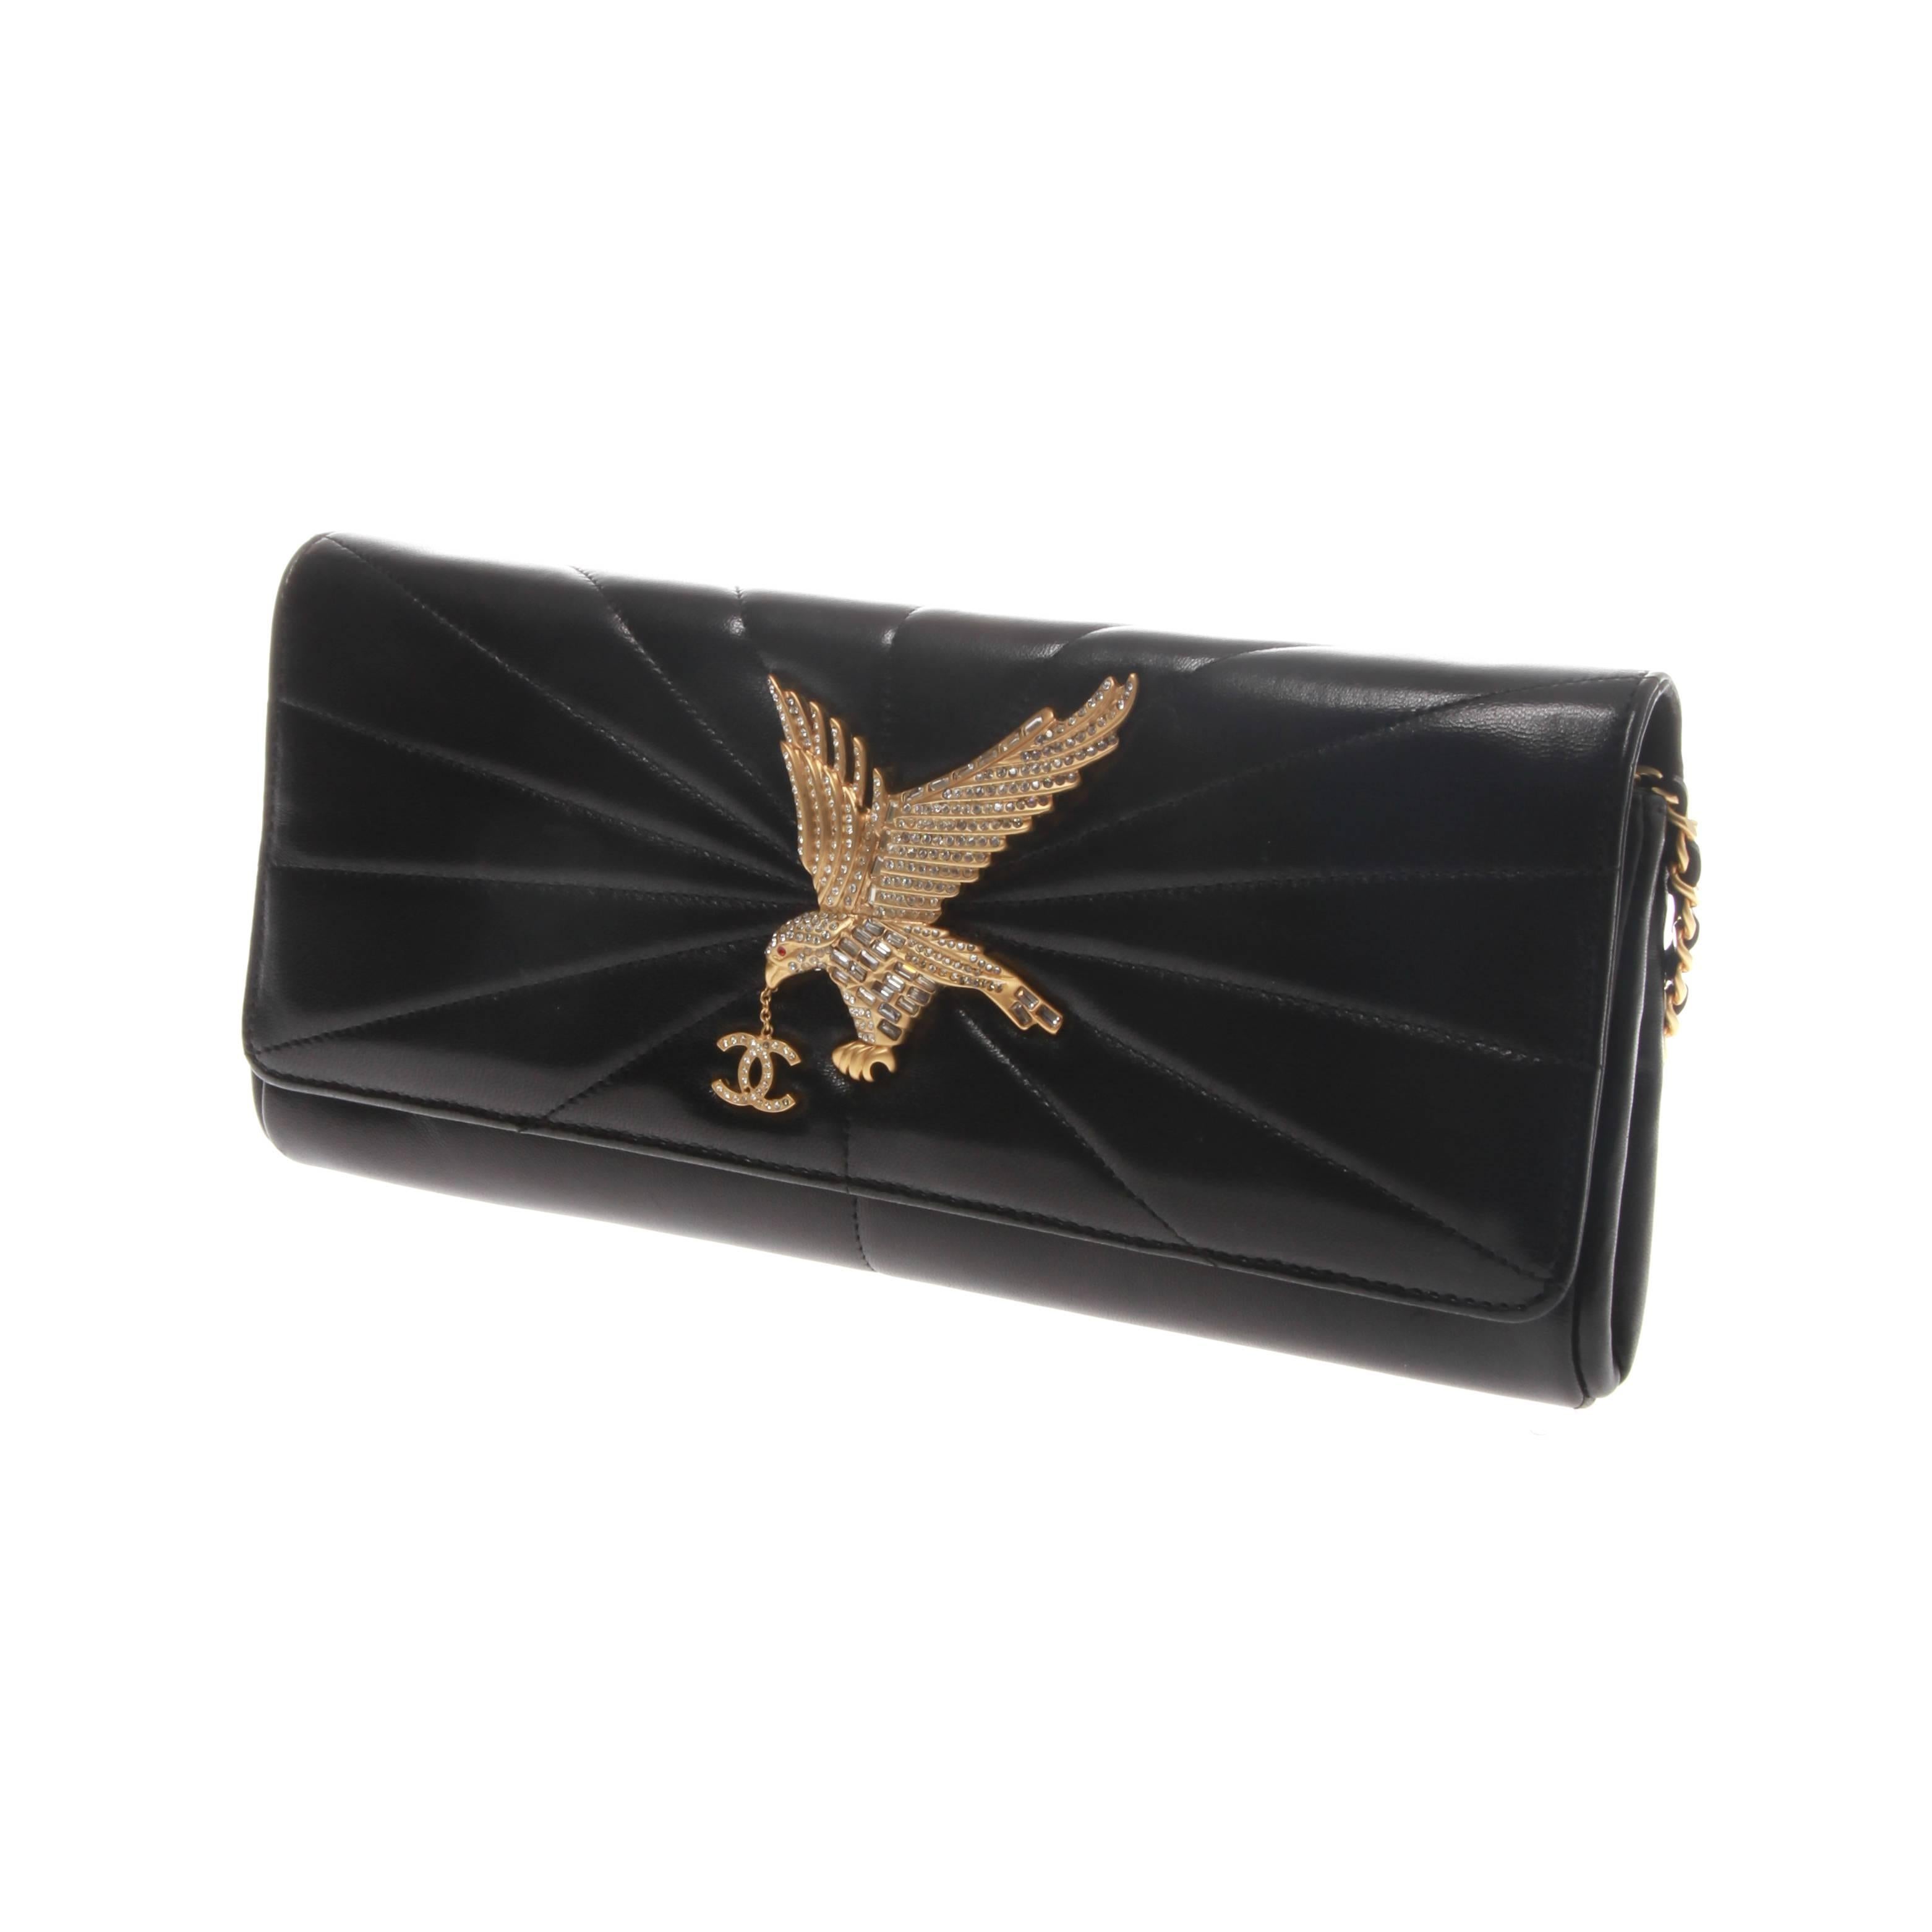 Chanel quilted black leather clutch with gold-tone hardware